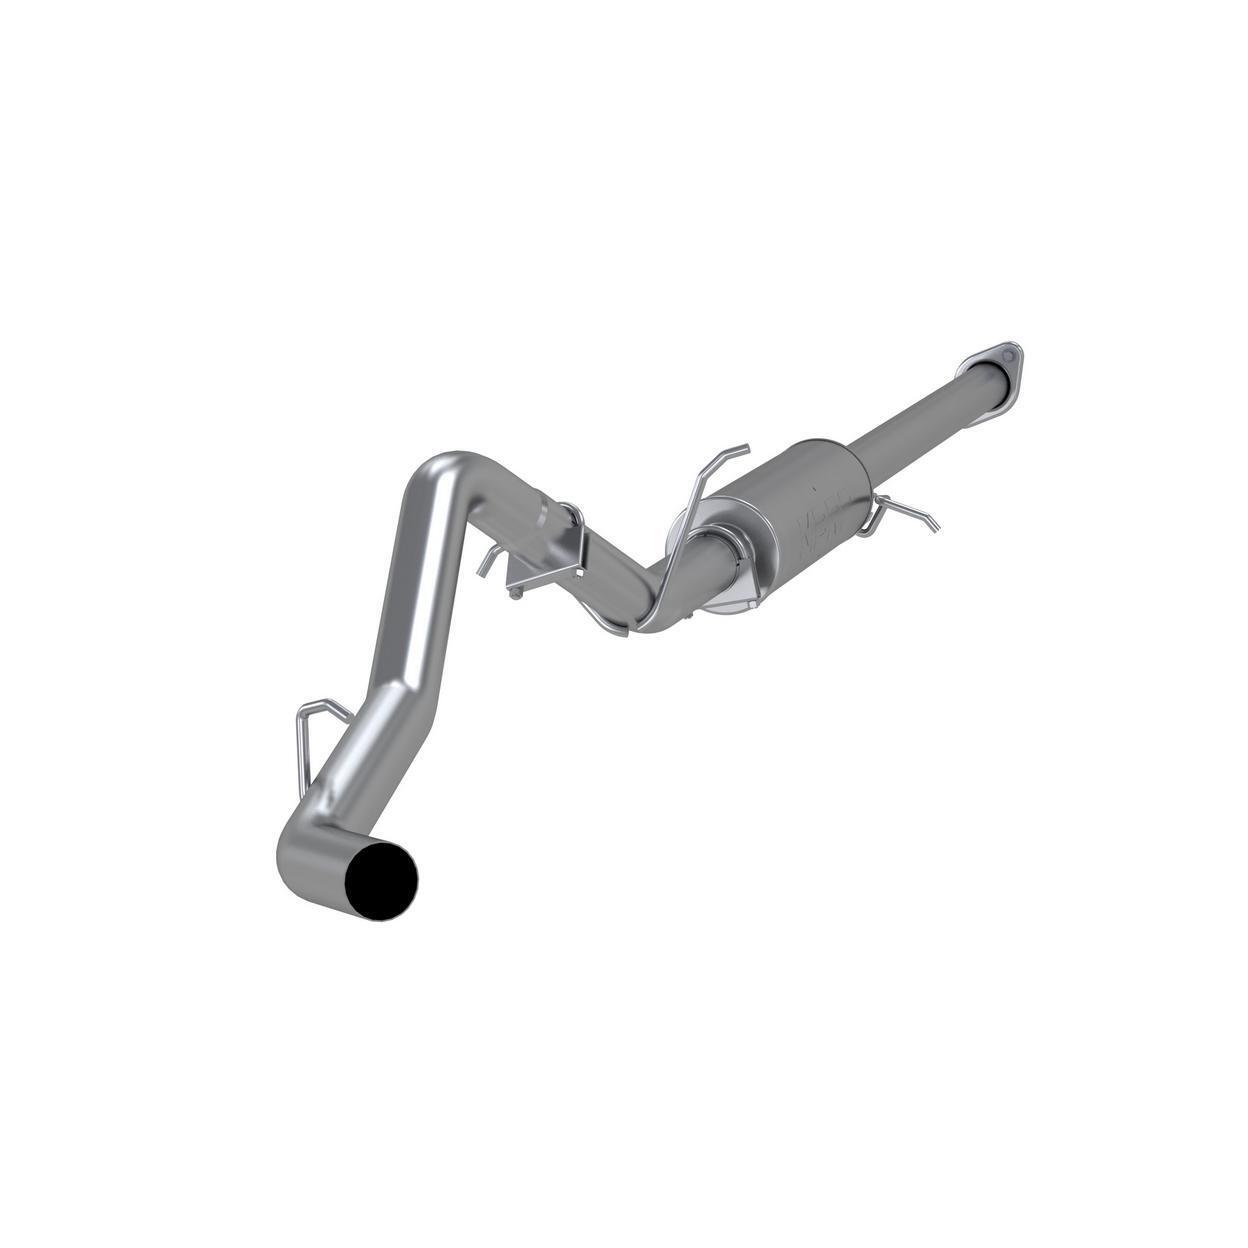 MBRP Exhaust S5036P-IM Exhaust System Kit for 2007 Chevrolet Silverado 1500